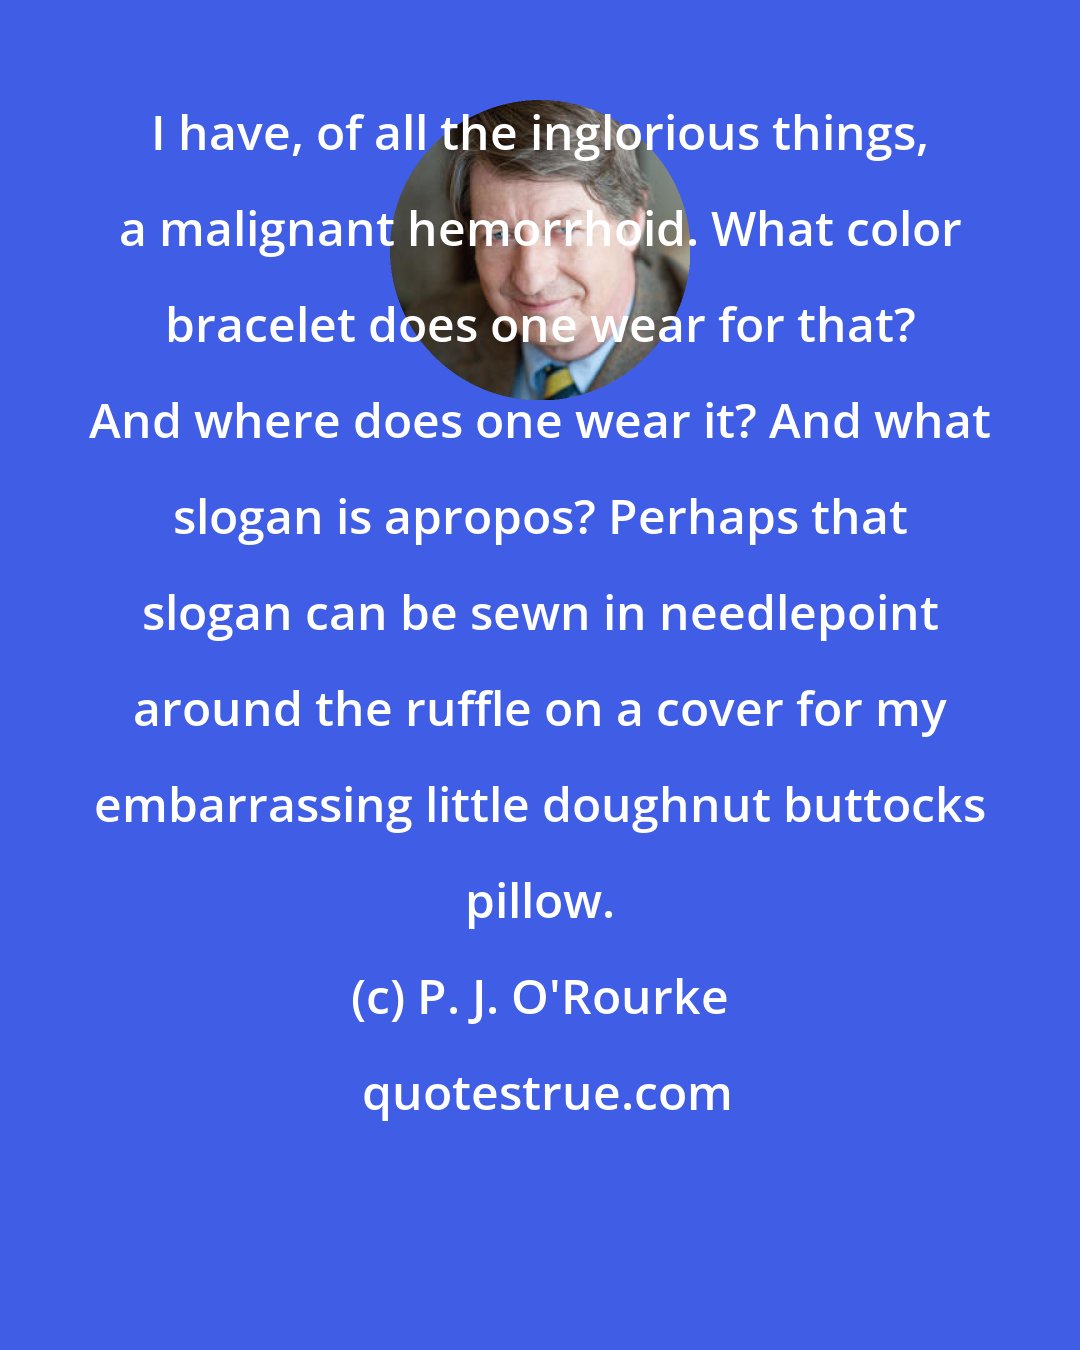 P. J. O'Rourke: I have, of all the inglorious things, a malignant hemorrhoid. What color bracelet does one wear for that? And where does one wear it? And what slogan is apropos? Perhaps that slogan can be sewn in needlepoint around the ruffle on a cover for my embarrassing little doughnut buttocks pillow.